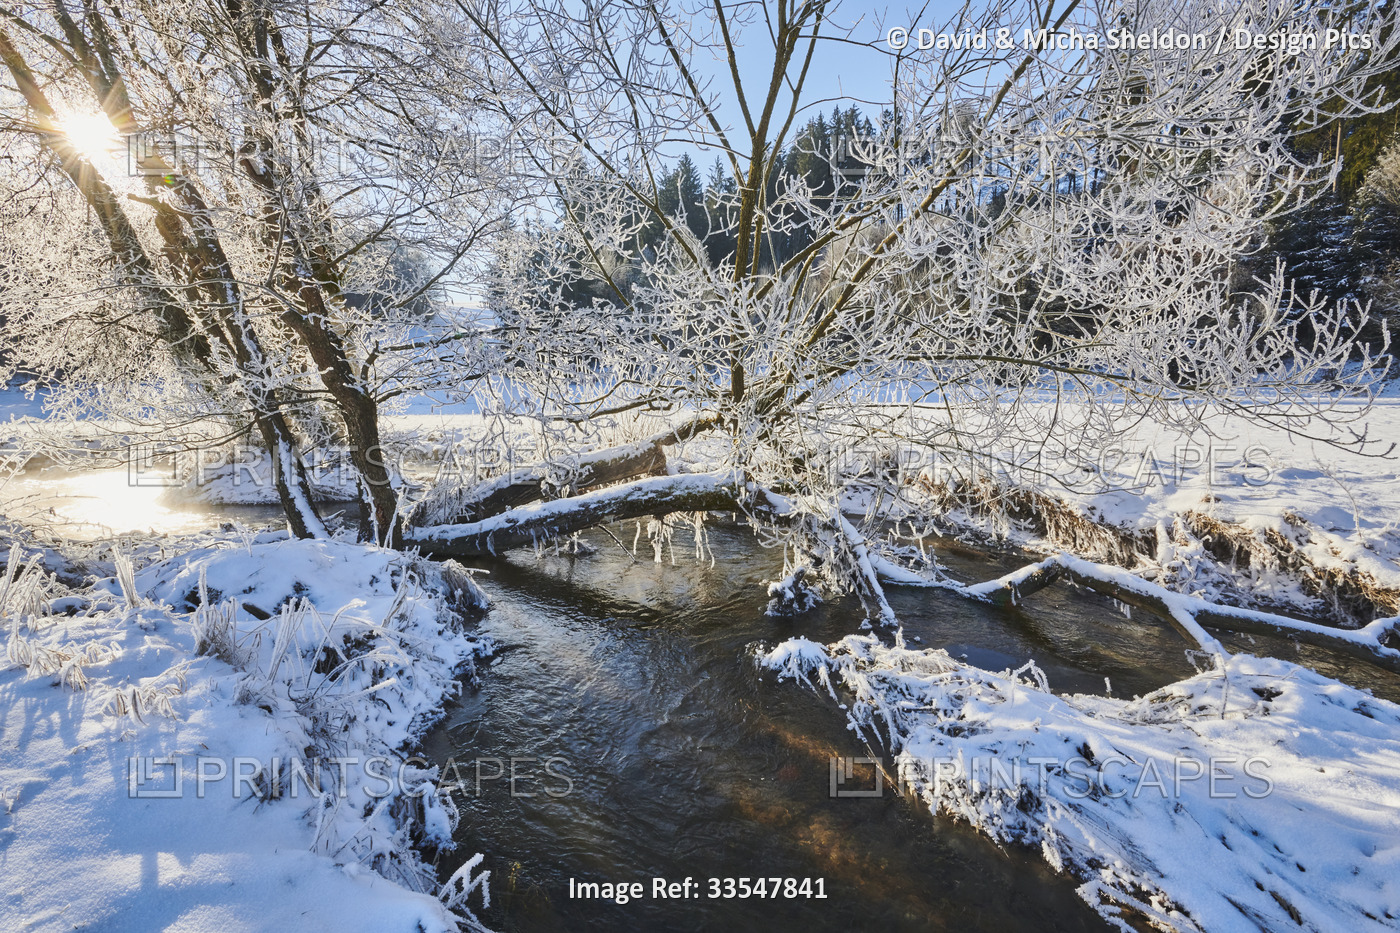 Frozen and snowy landscape with a flowing stream; Bavaria, Germany